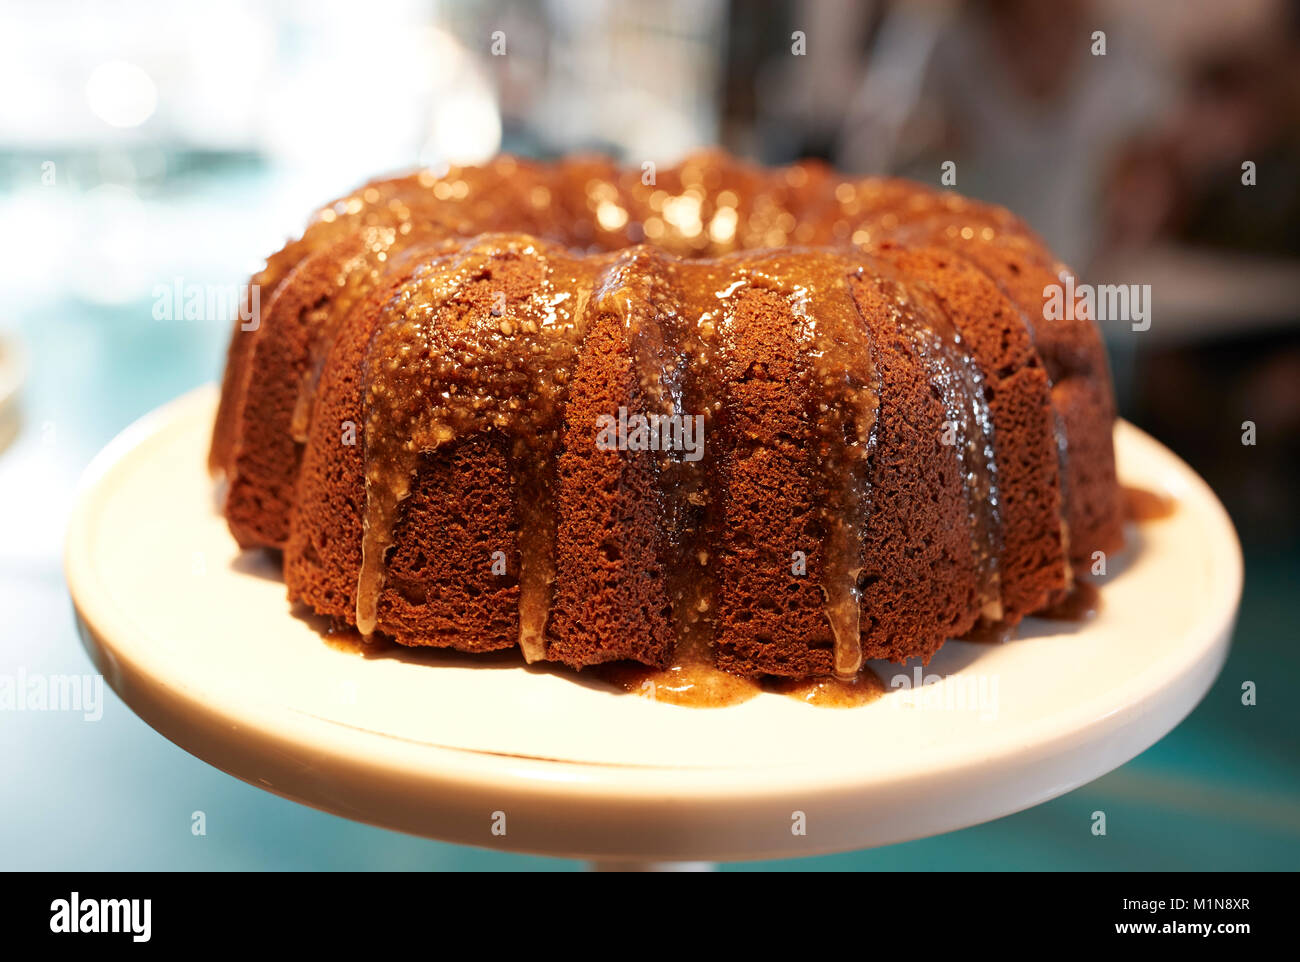 Freshly Baked Treacle Cake On Stand In Coffee Shop Stock Photo